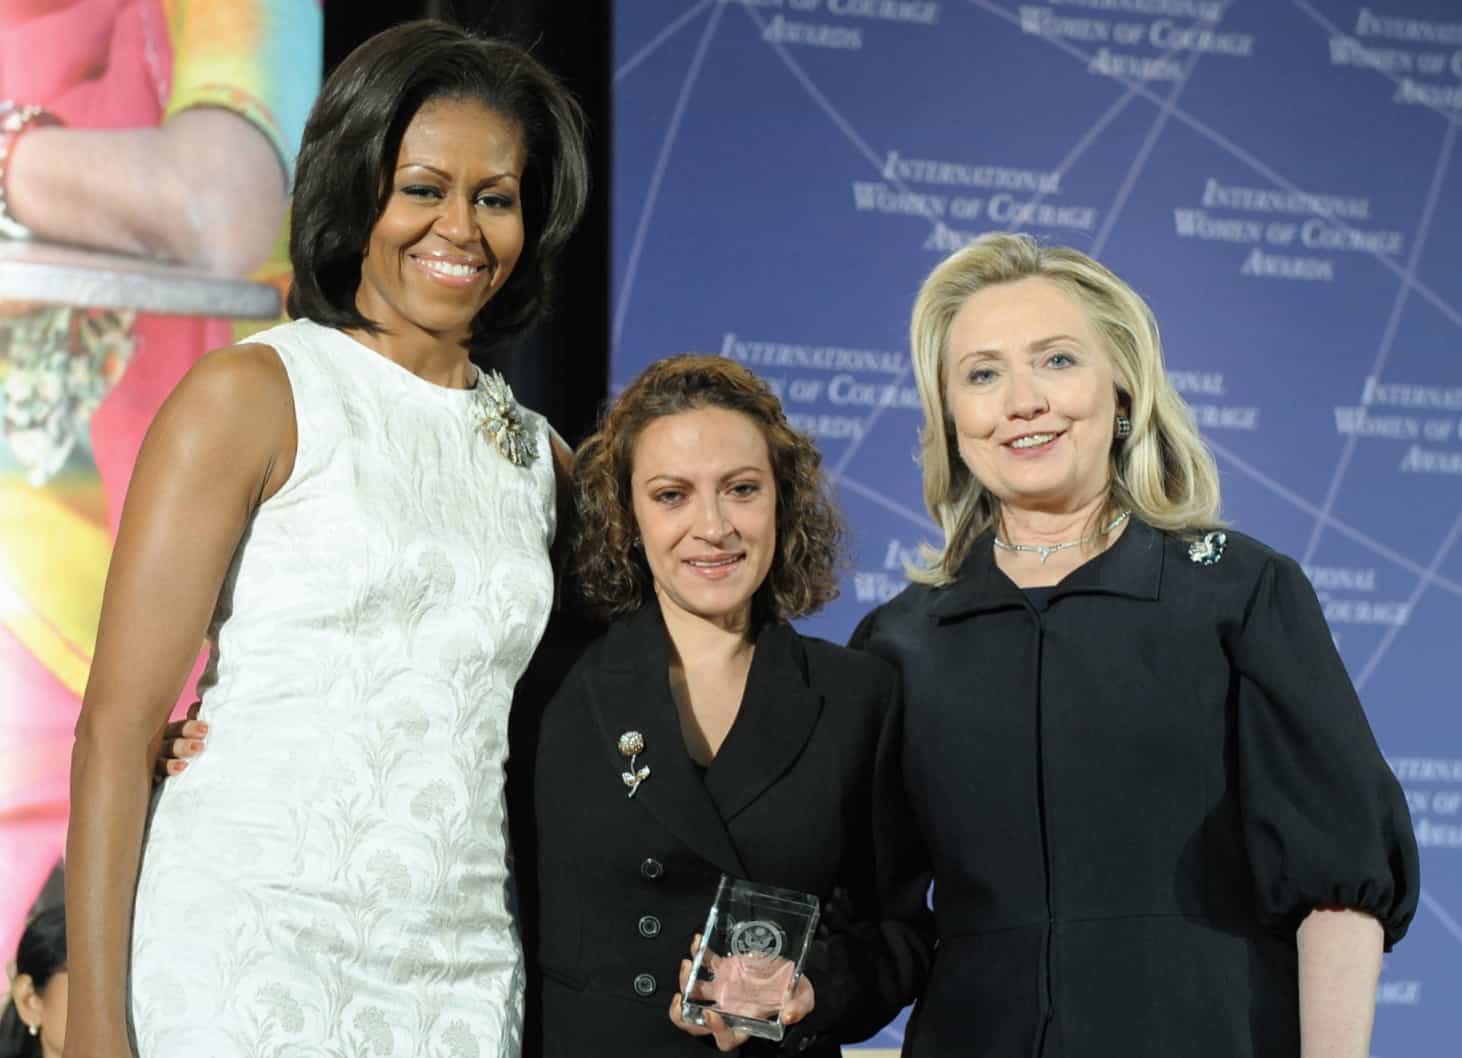 First Lady Michelle Obama, left; and Hillary Rodham Clinton, right; and pose for a photo with 2012 International Women of Courage (IWOC) Award Winner Jineth Bedoya Lima of Colombia